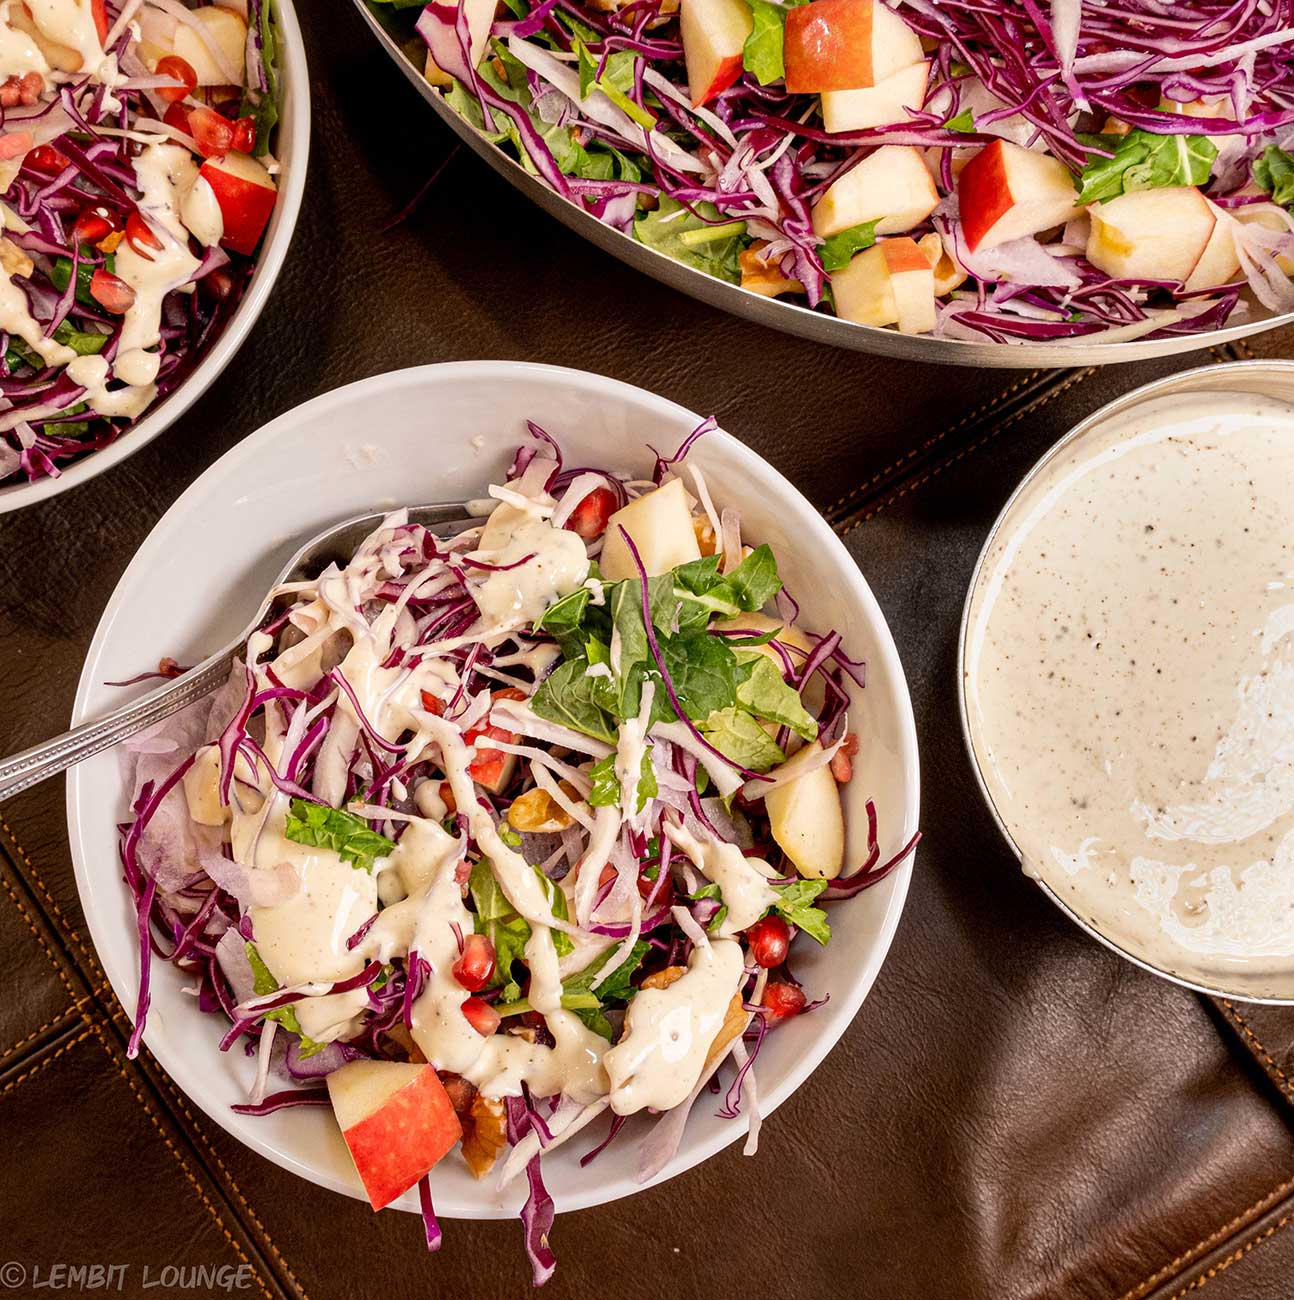 Mixed cabbage salad with mustard dressing